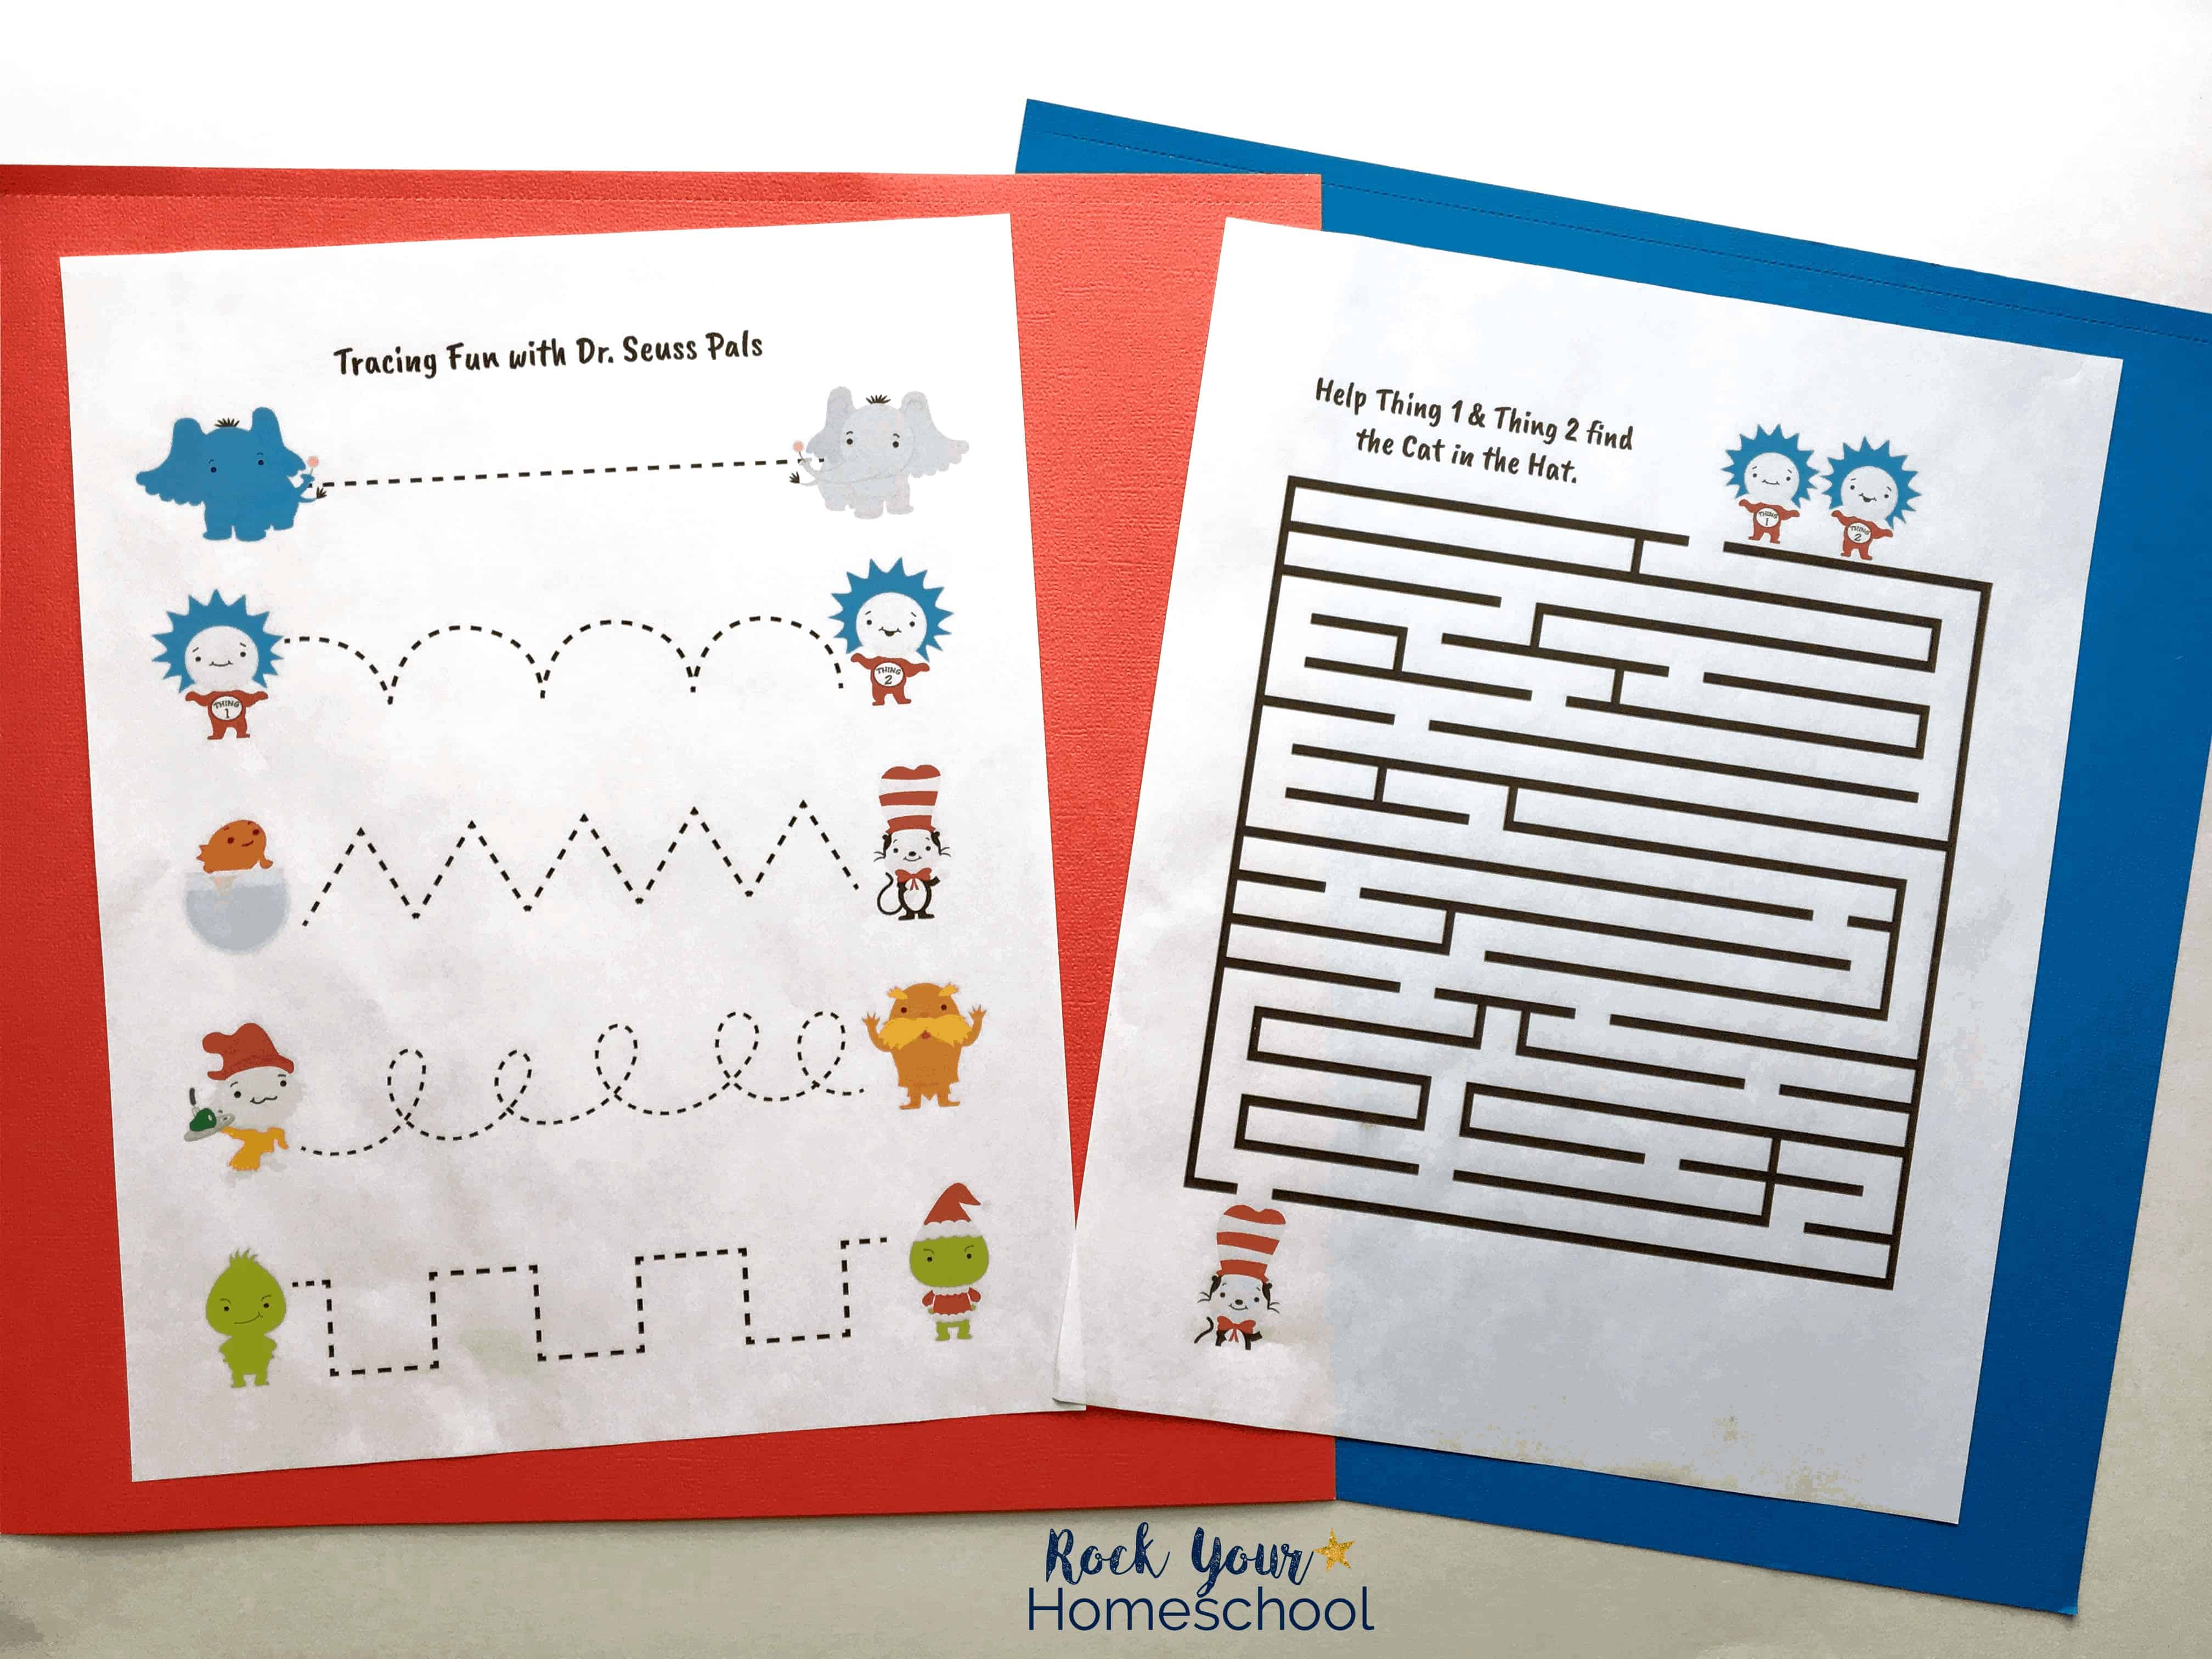 Enjoy the tracing pages & mazes in this free printable pack of Learning Fun with Dr. Seuss Pals.